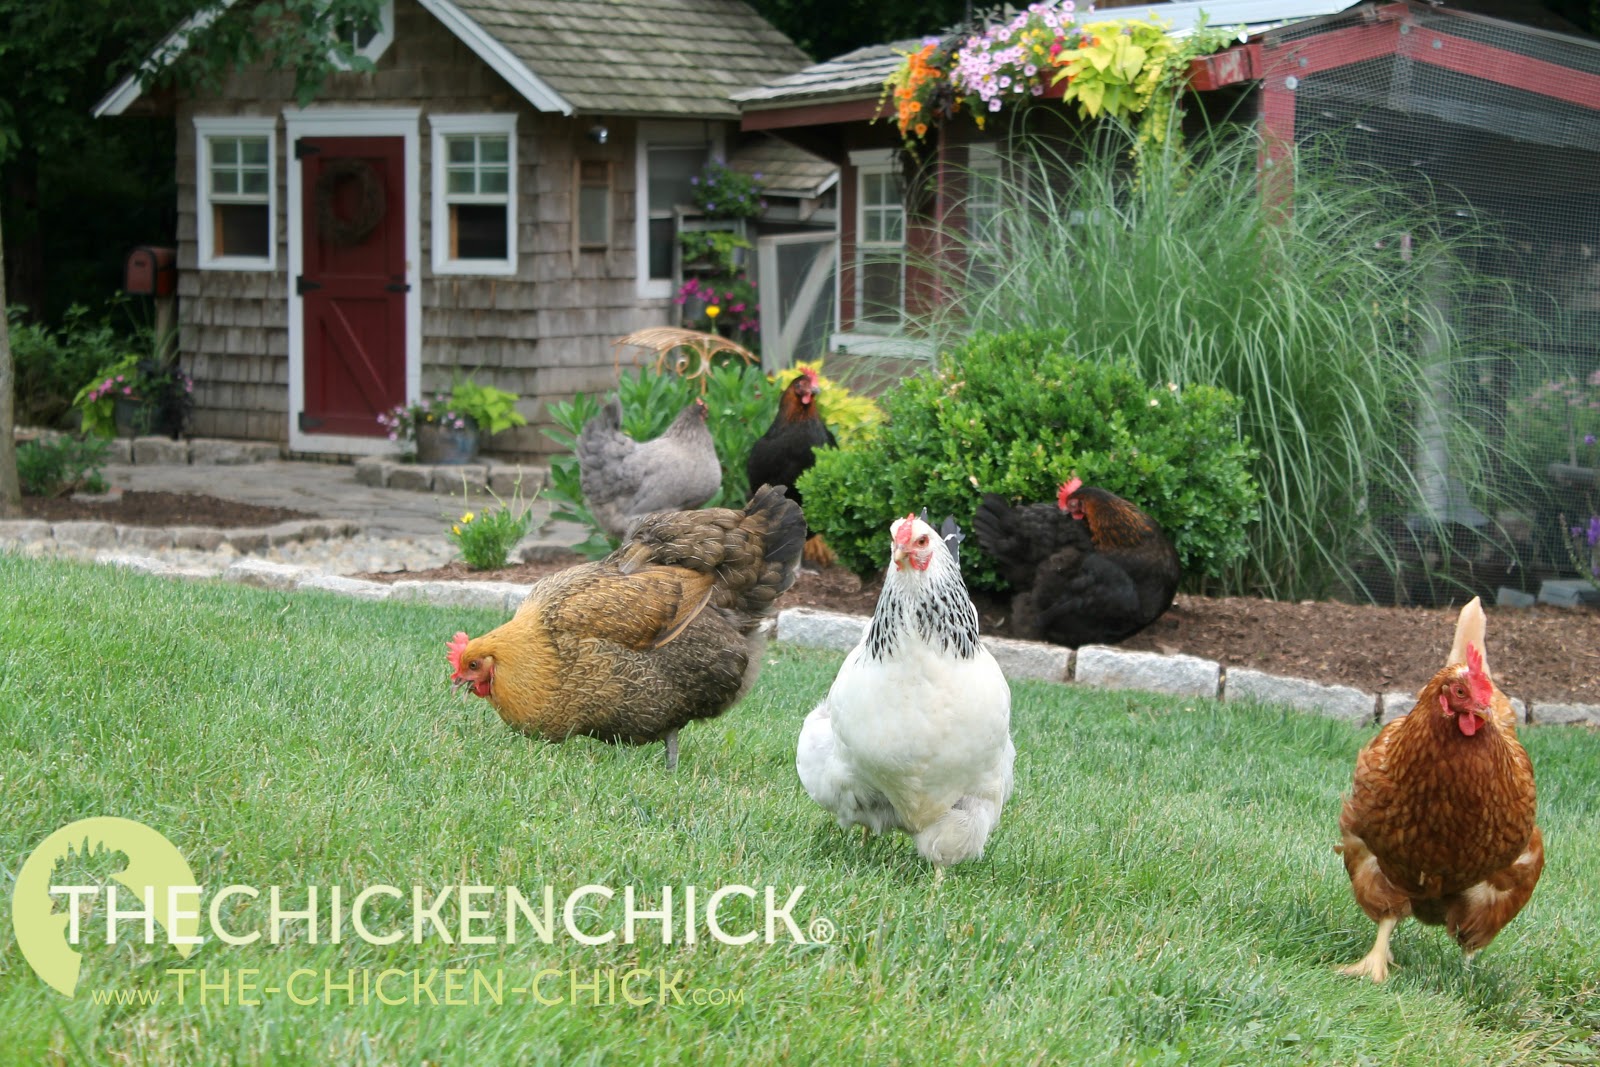 The Chicken Chick®: How Altering Feed can Hurt Your Chickens